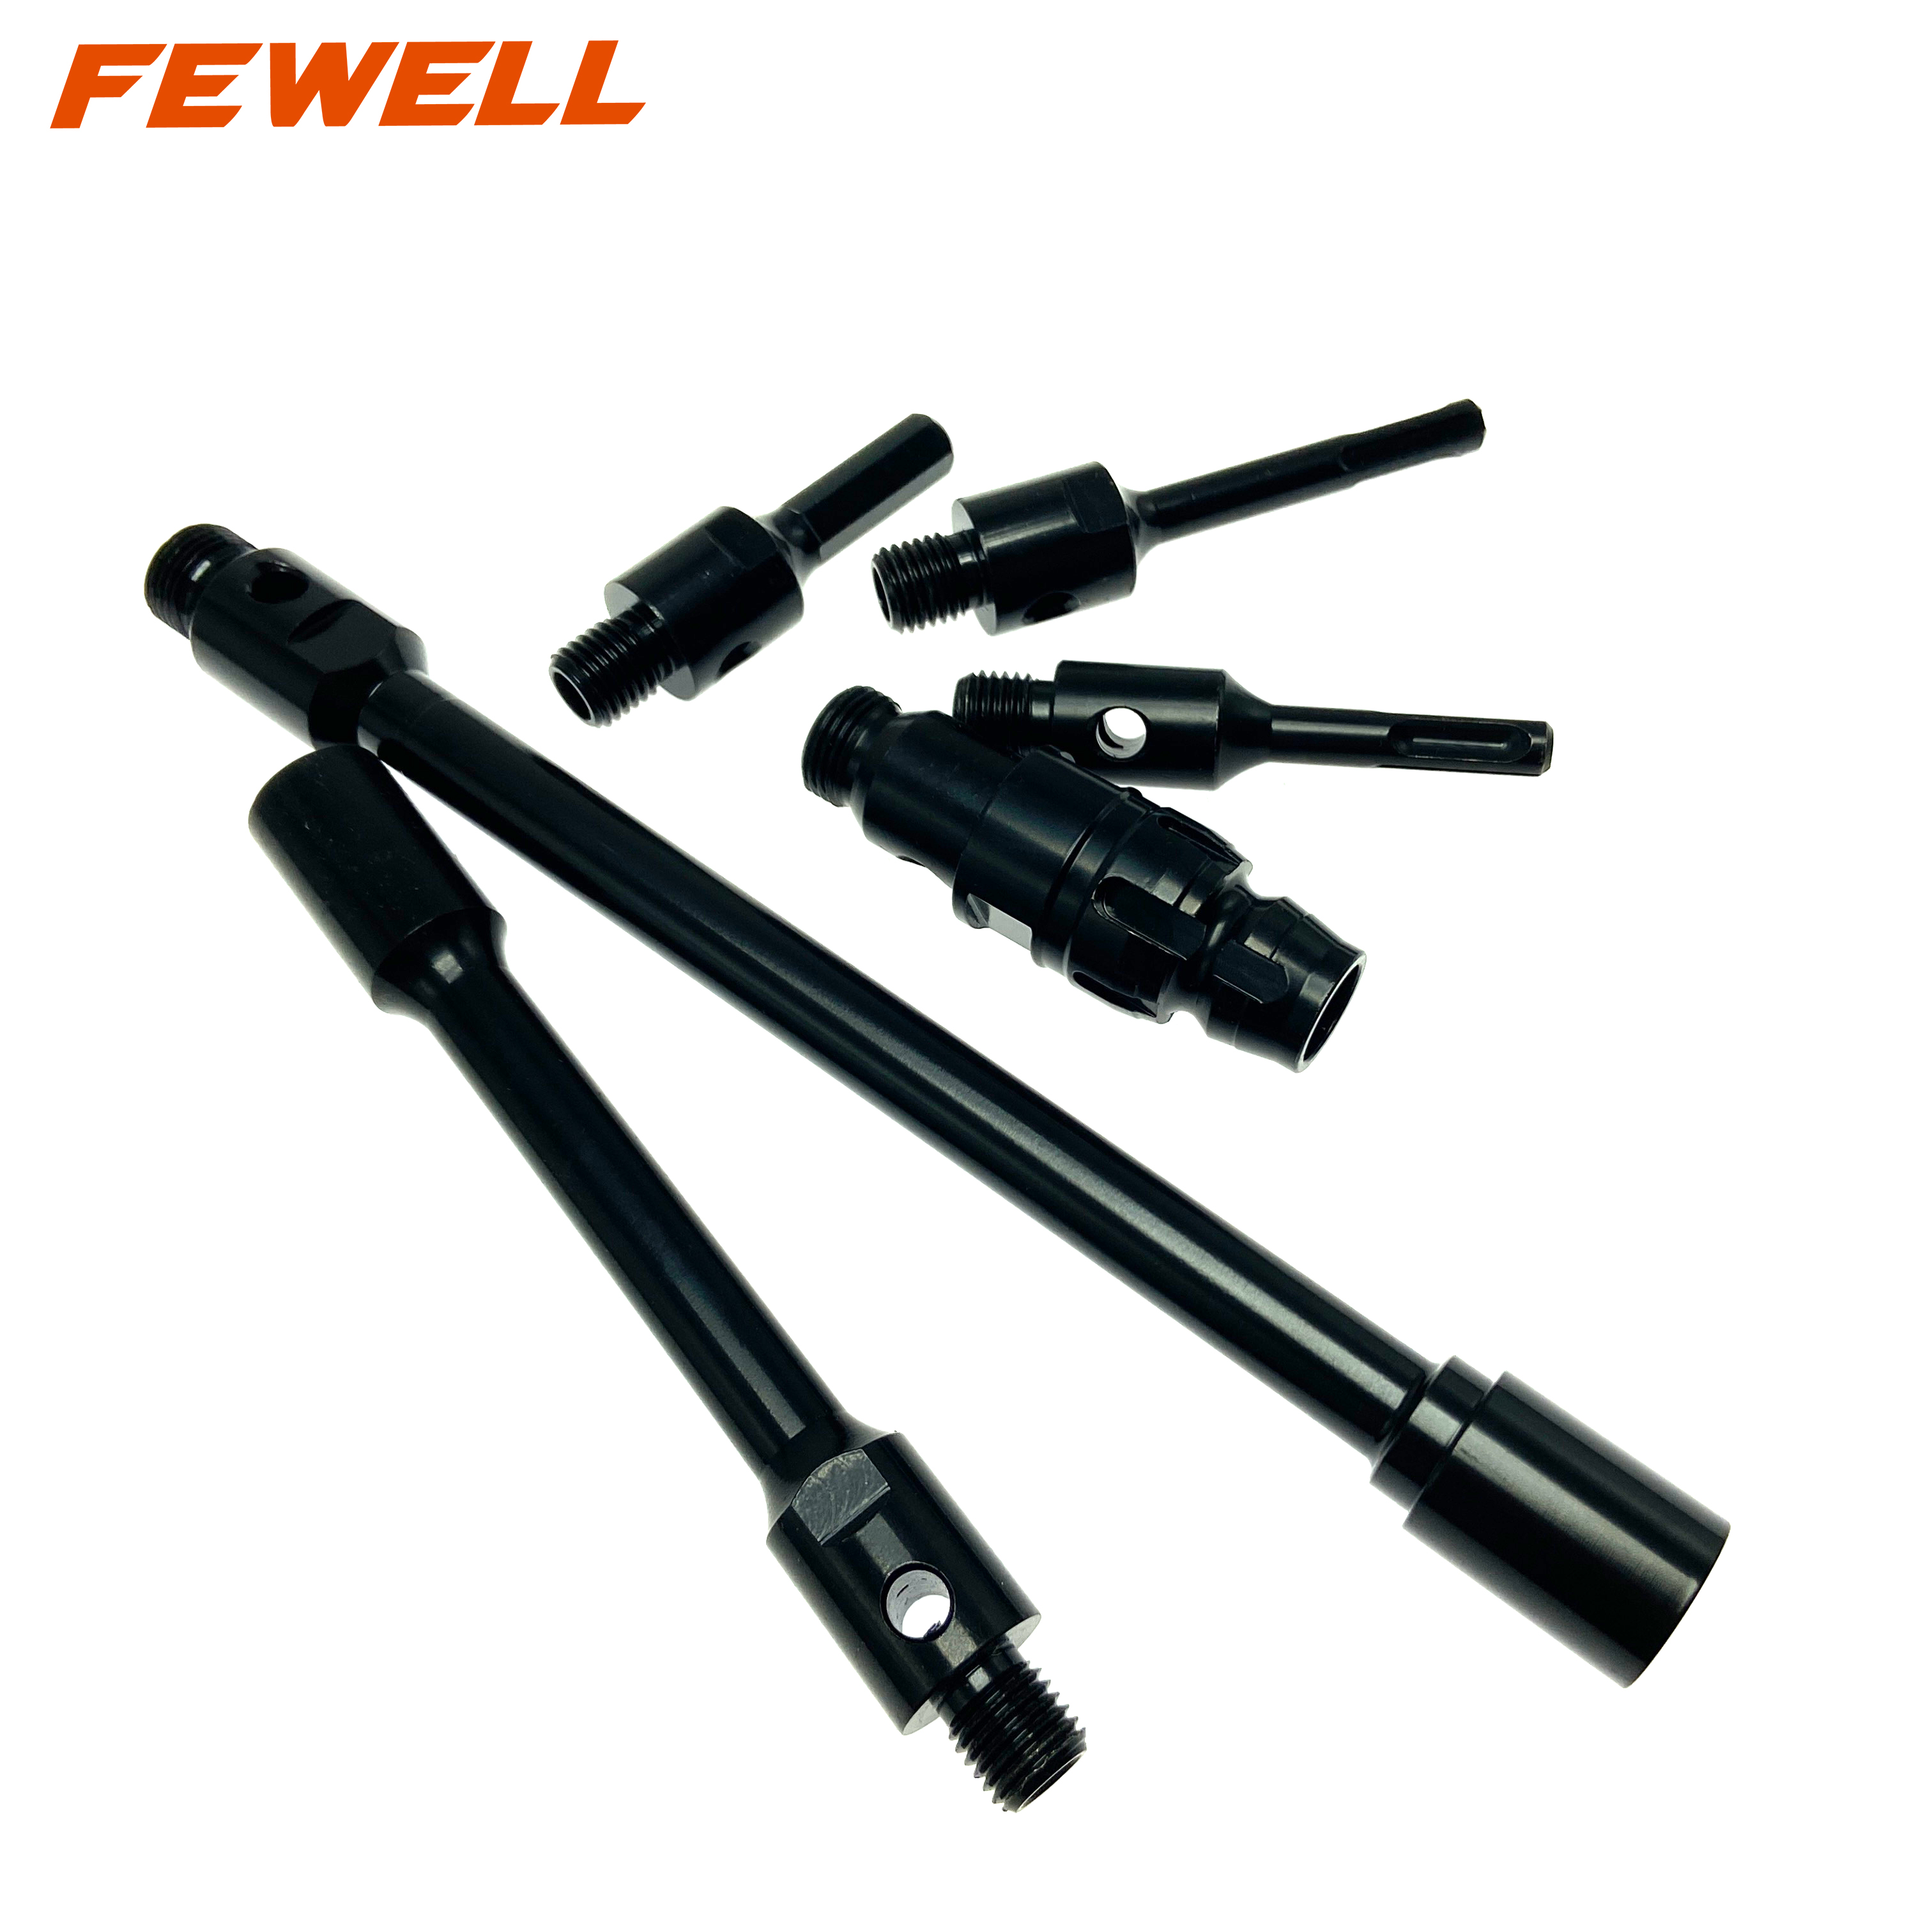 High quality G1/2BSP Male to G1/2BSP Female 300mm Connection Exchange Core Drill Bit Extension Rod Adapter 